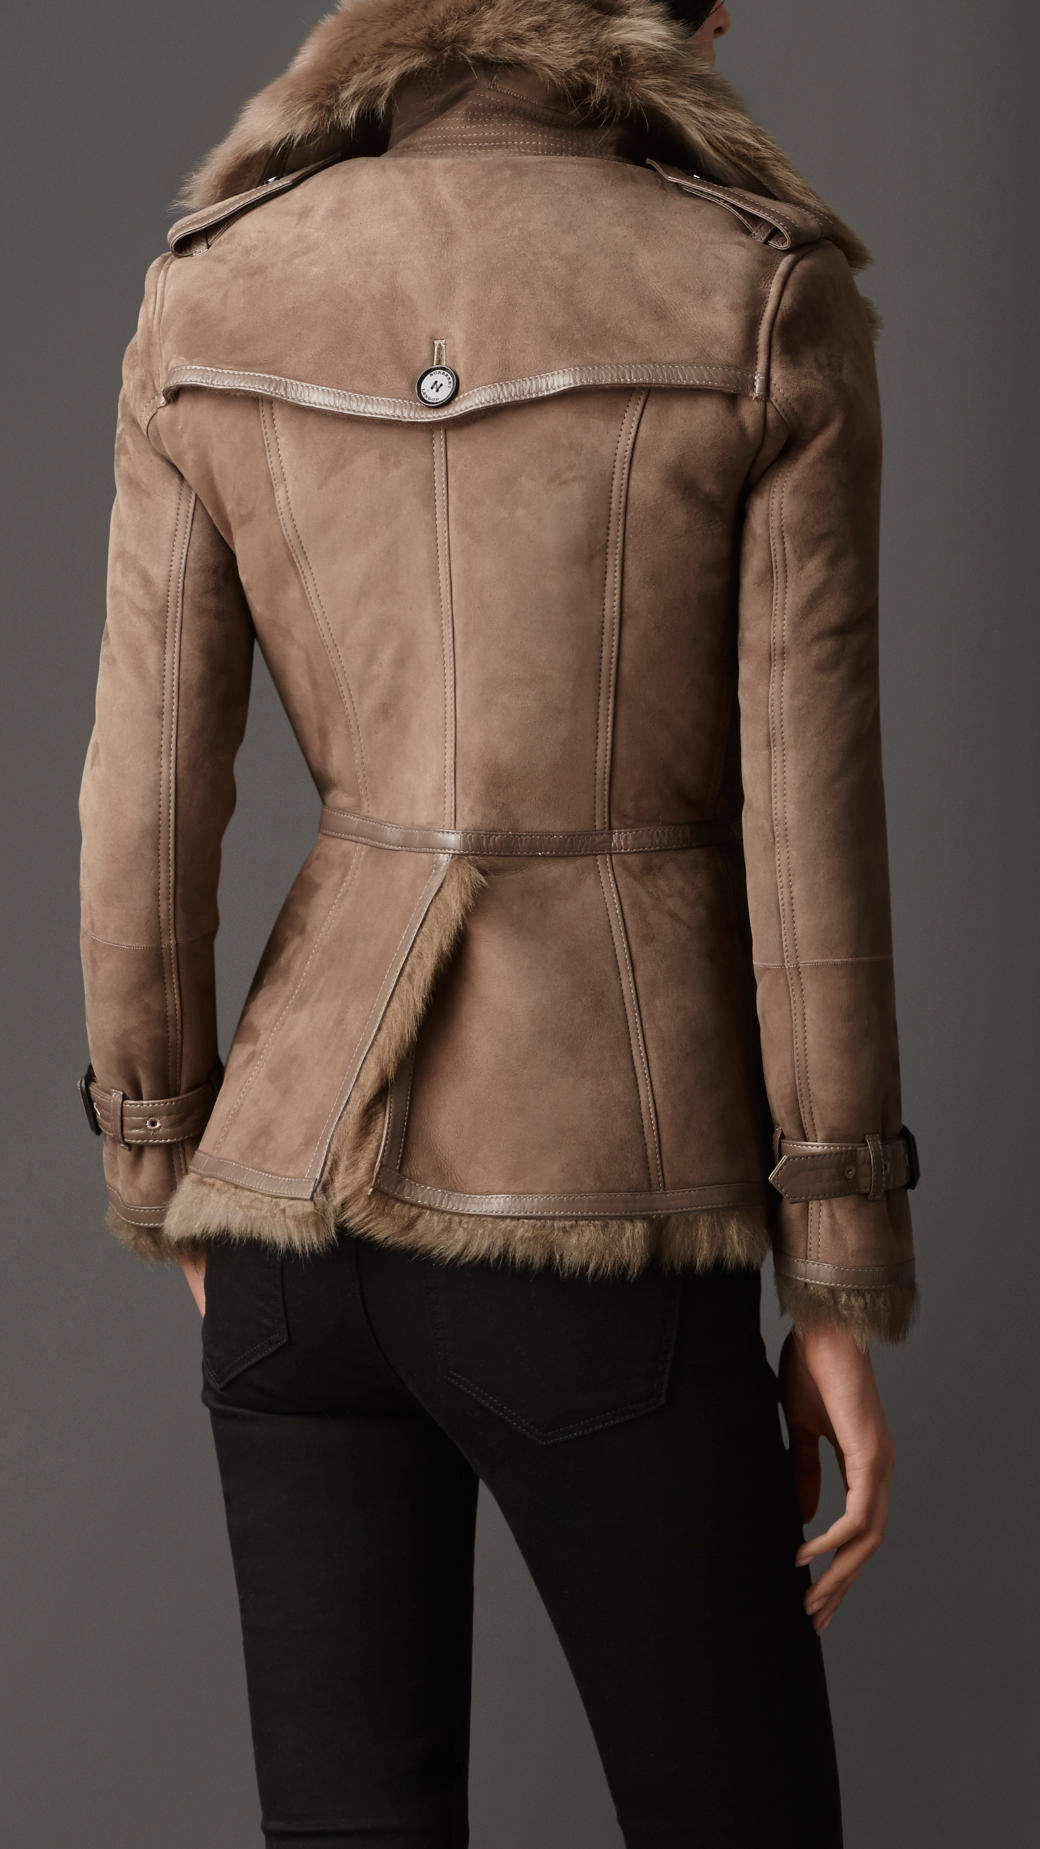 Lyst - Burberry Leather Trim Shearling Jacket in Brown